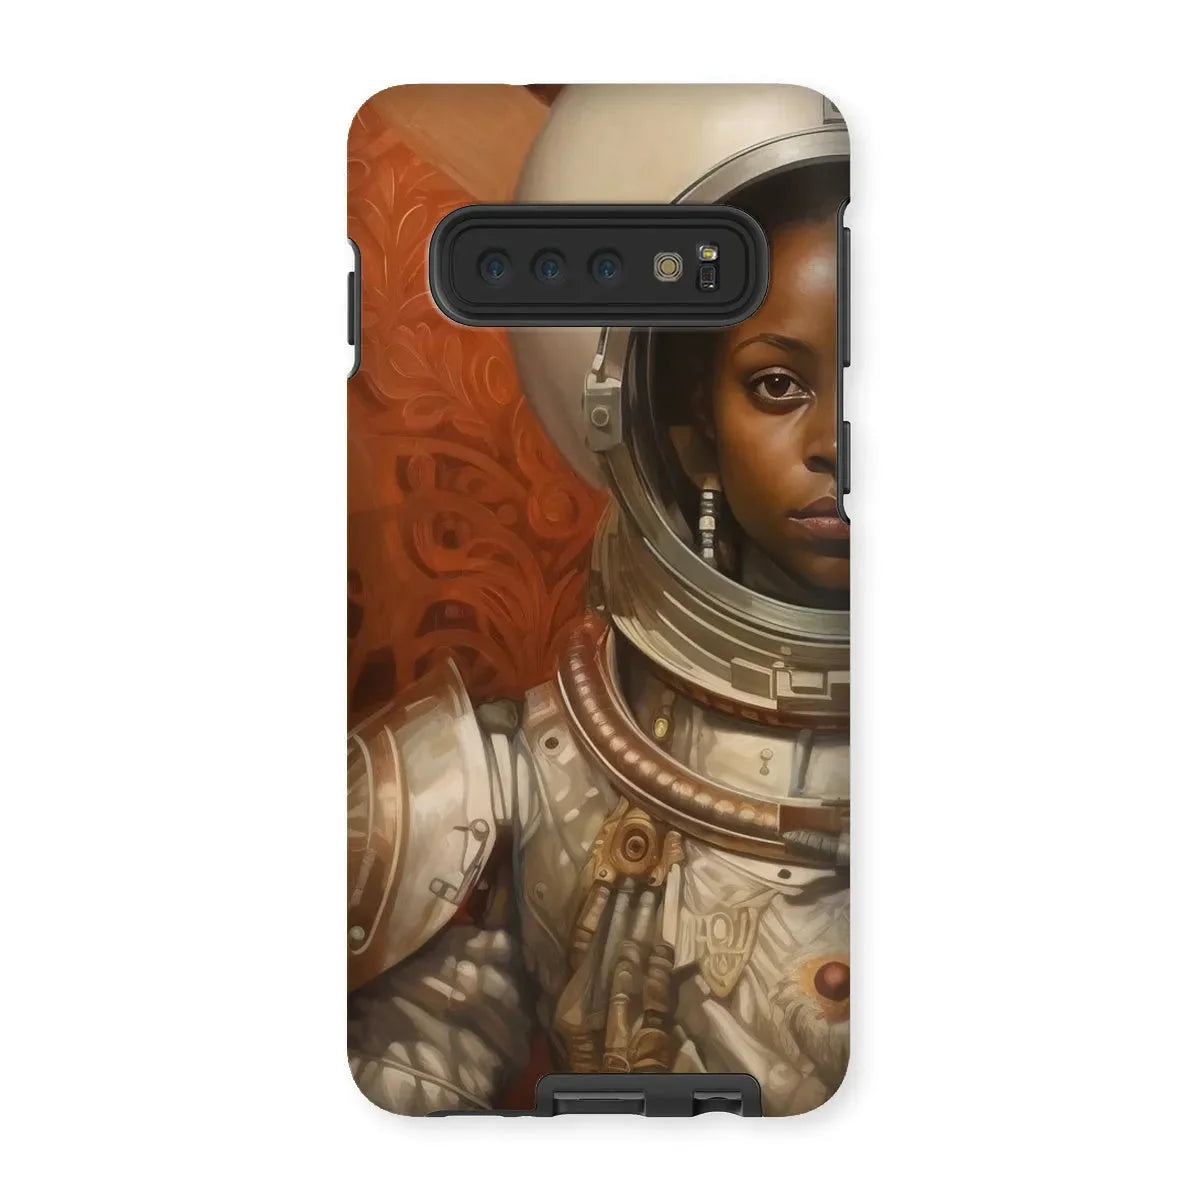 Ava The Lesbian Astronaut - Sapphic Aesthetic Phone Case - Samsung Galaxy S10 / Matte - Mobile Phone Cases - Aesthetic